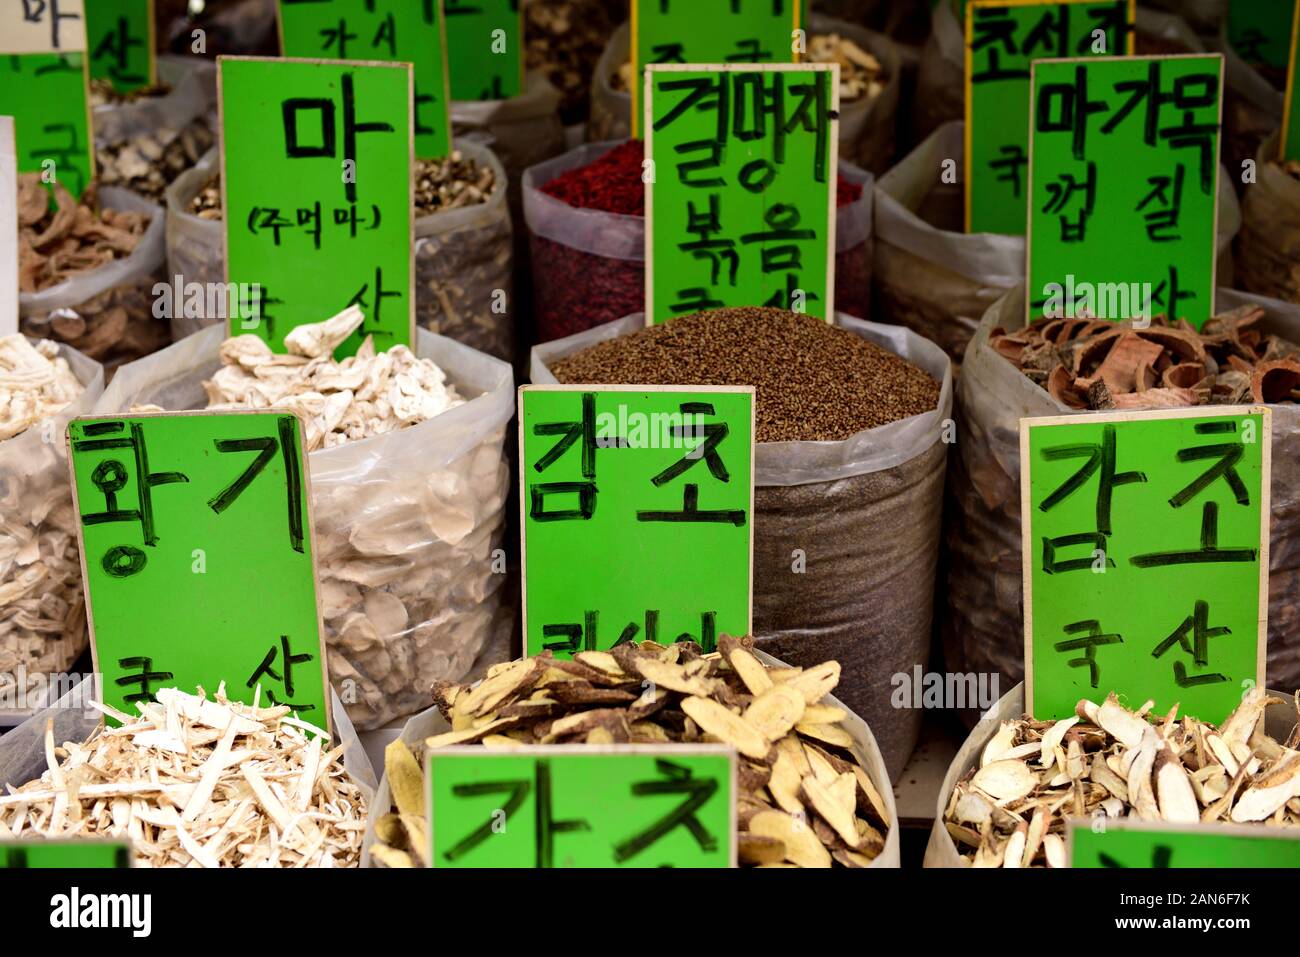 Containers of traditional Korean natural medicine, bark, roots and herbs in a street medicine market in Seoul, South Korea Stock Photo